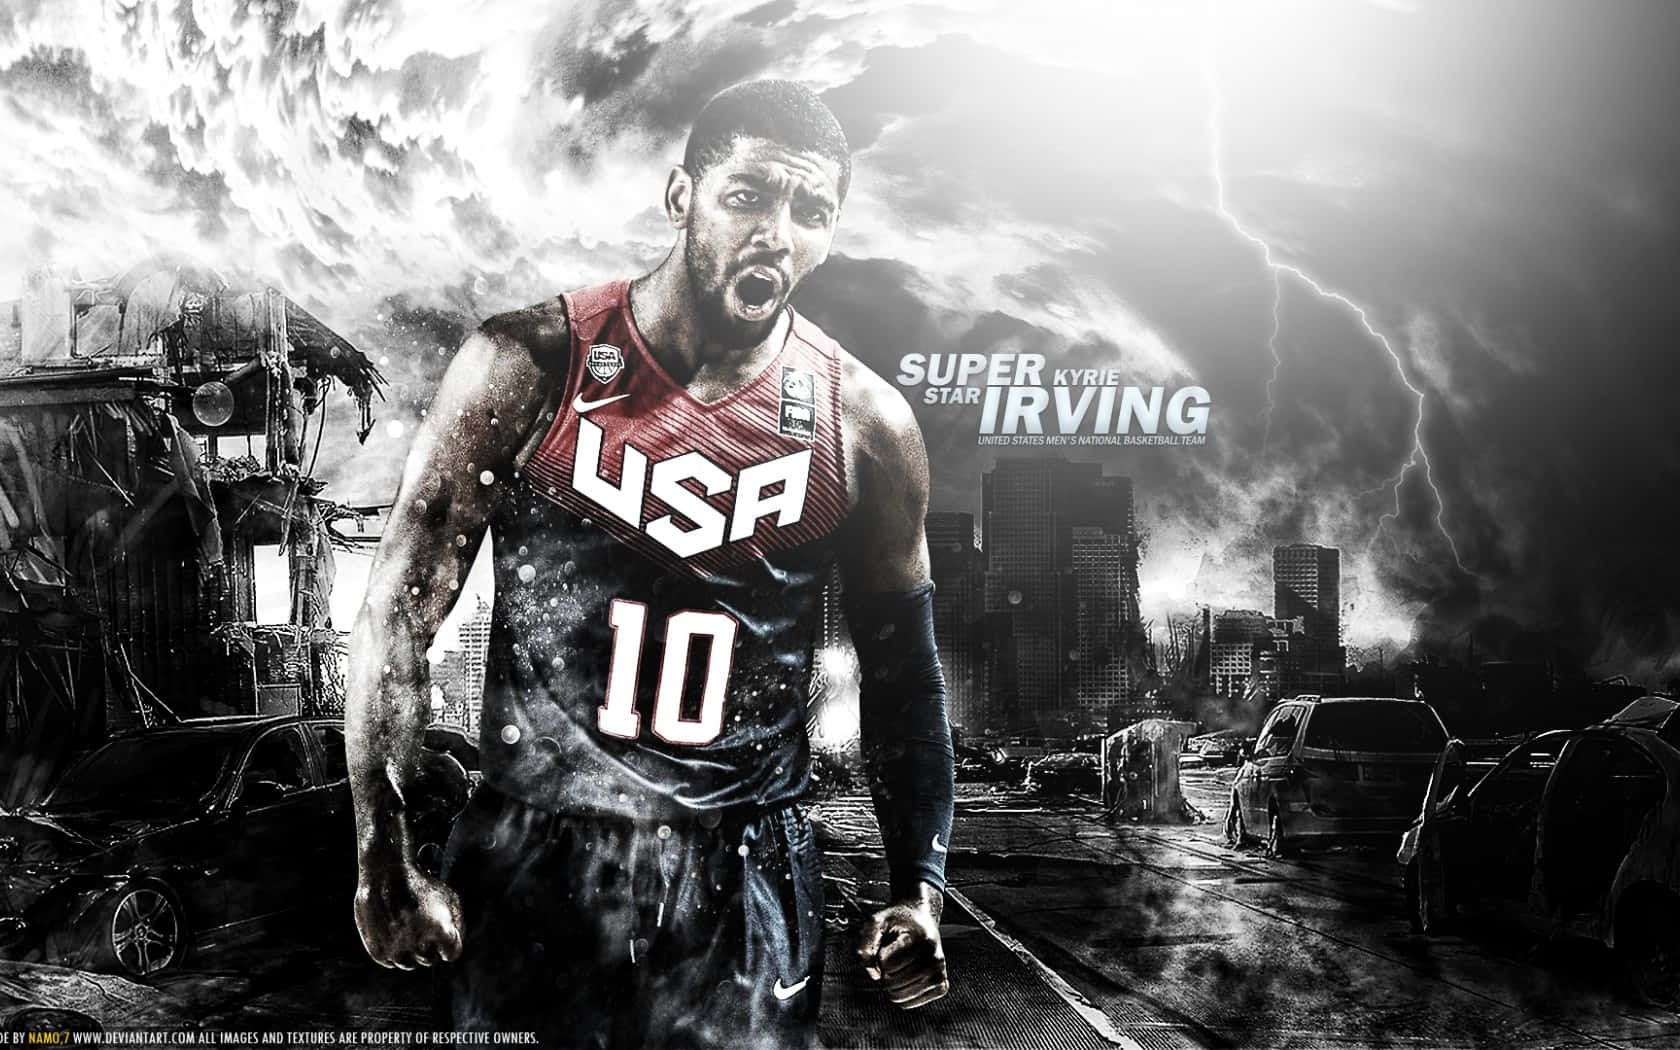 Kyrie Irving shows off his signature cool style while taking off for the hoop. Wallpaper